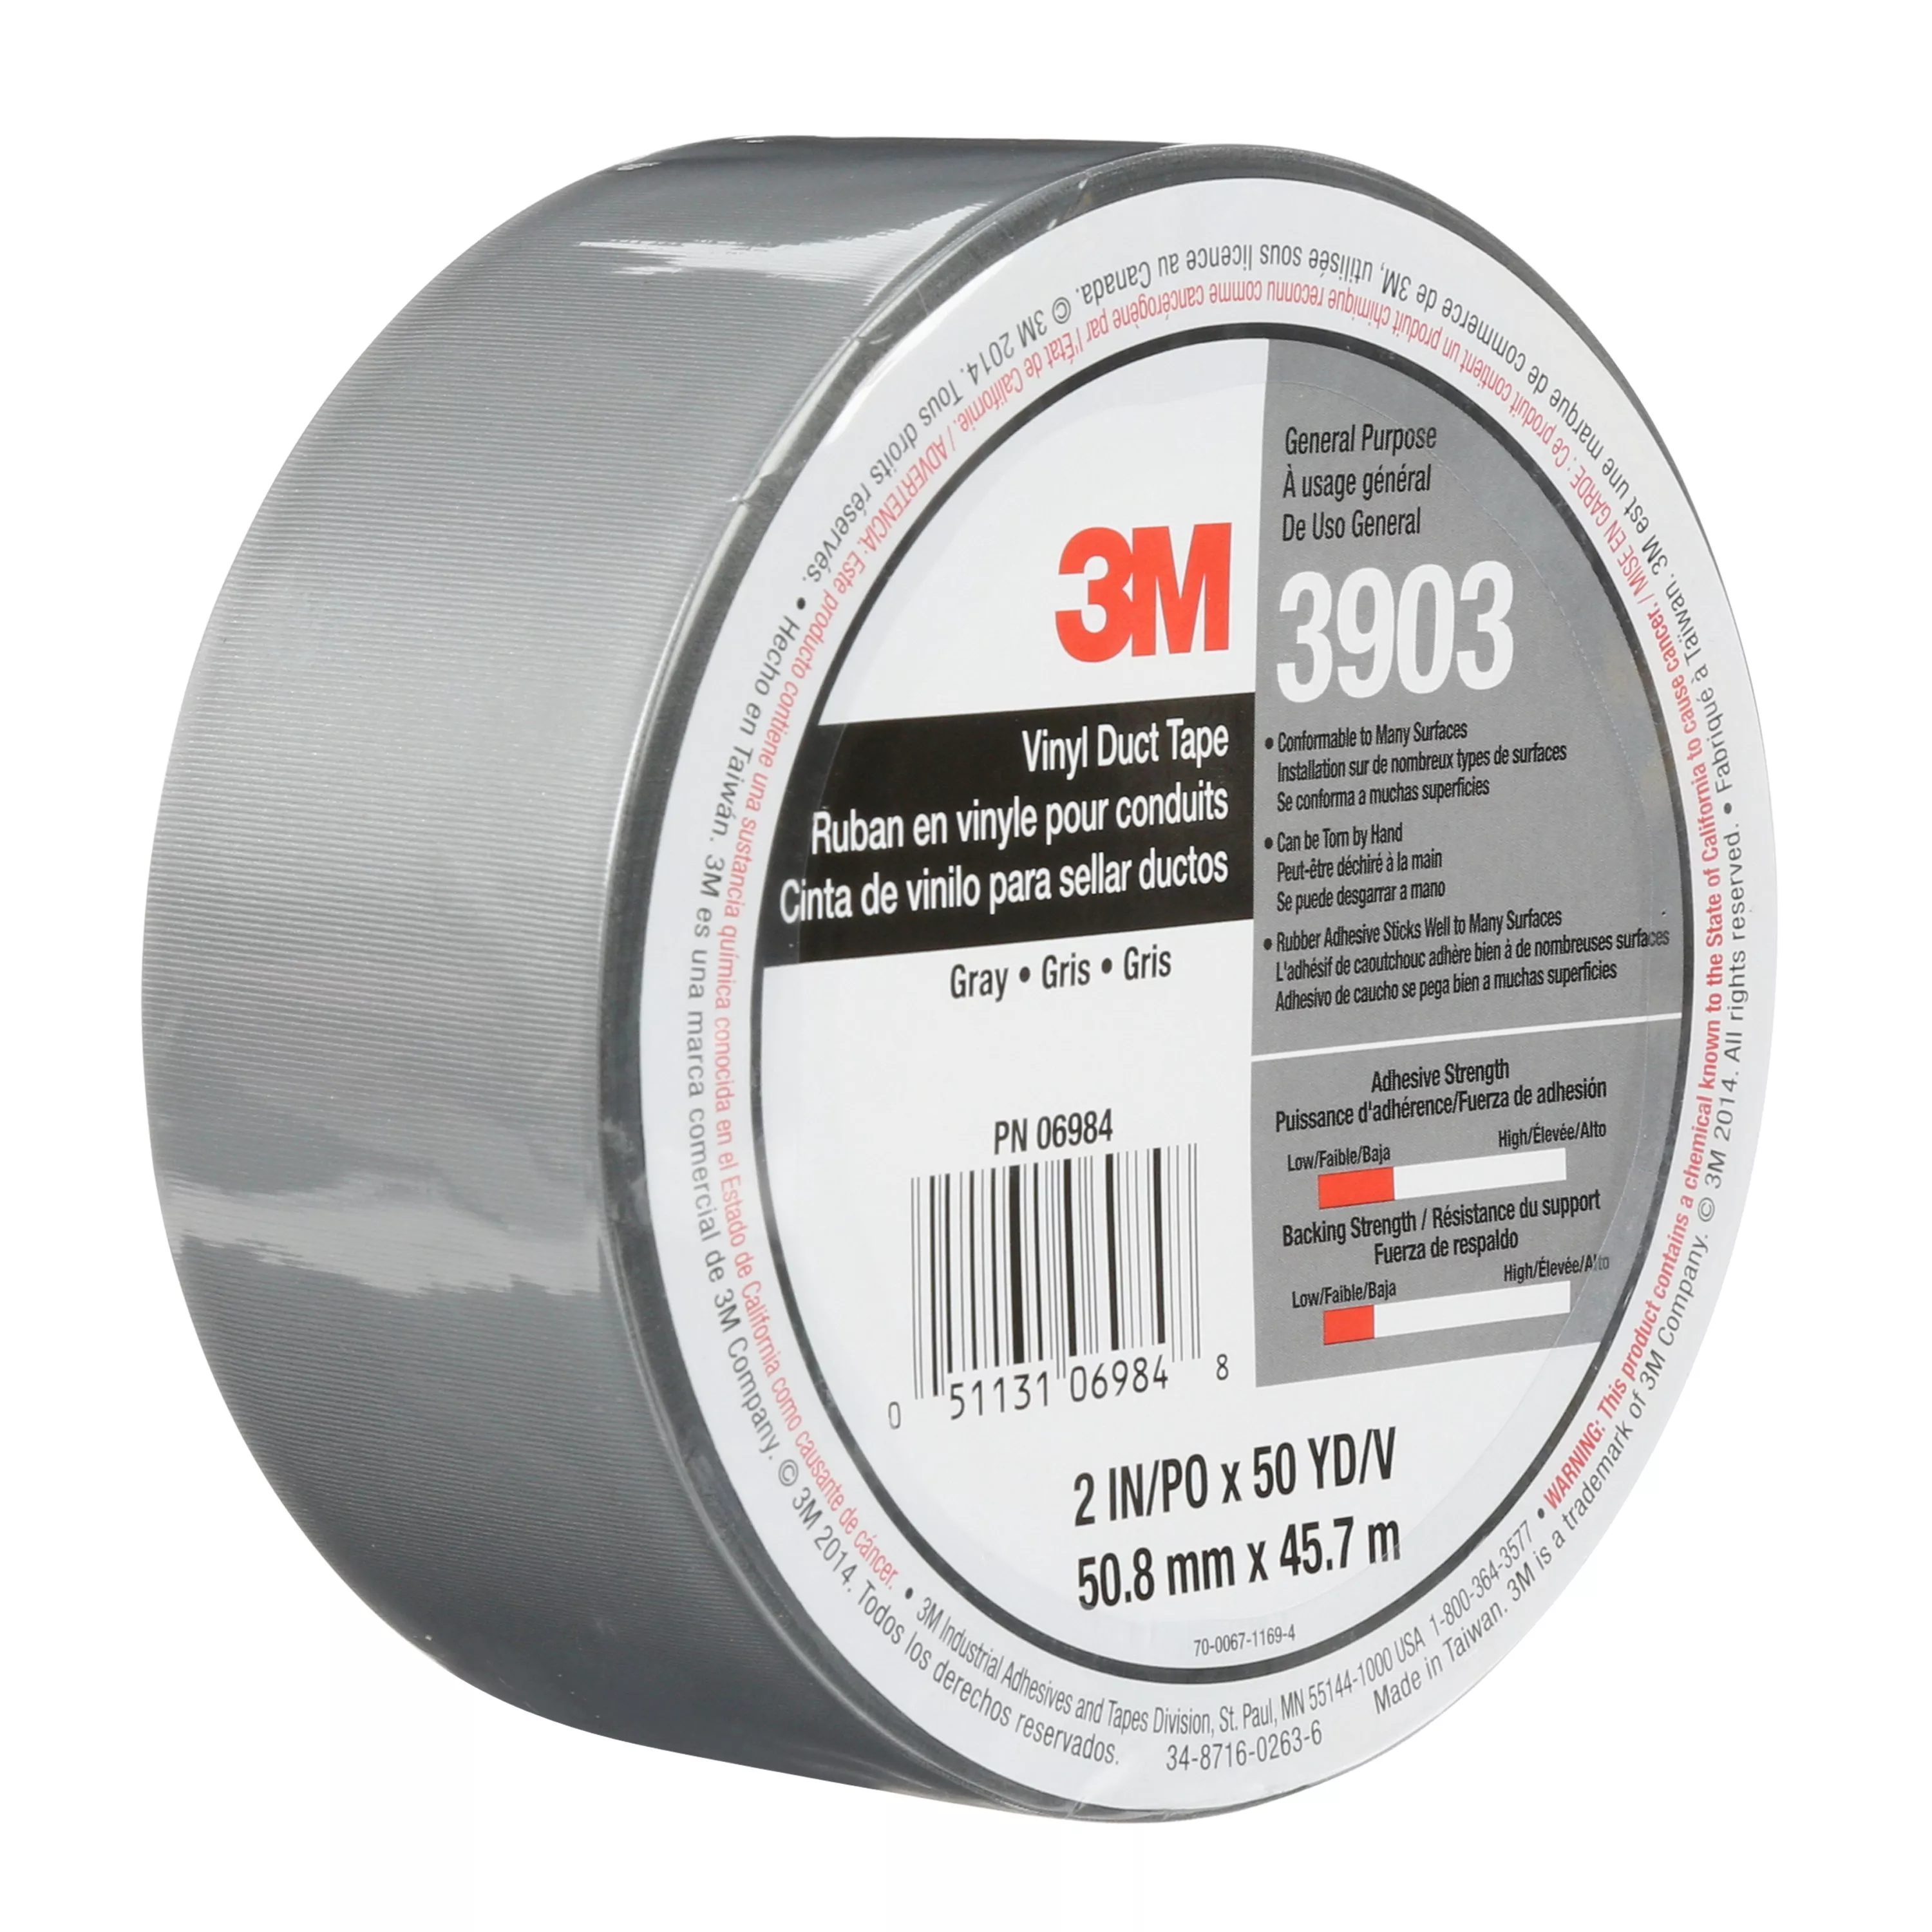 3M™ Vinyl Duct Tape 3903, Gray, 2 in x 50 yd 6.5 mil, 24/Case,
Individually Wrapped Conveniently Packaged